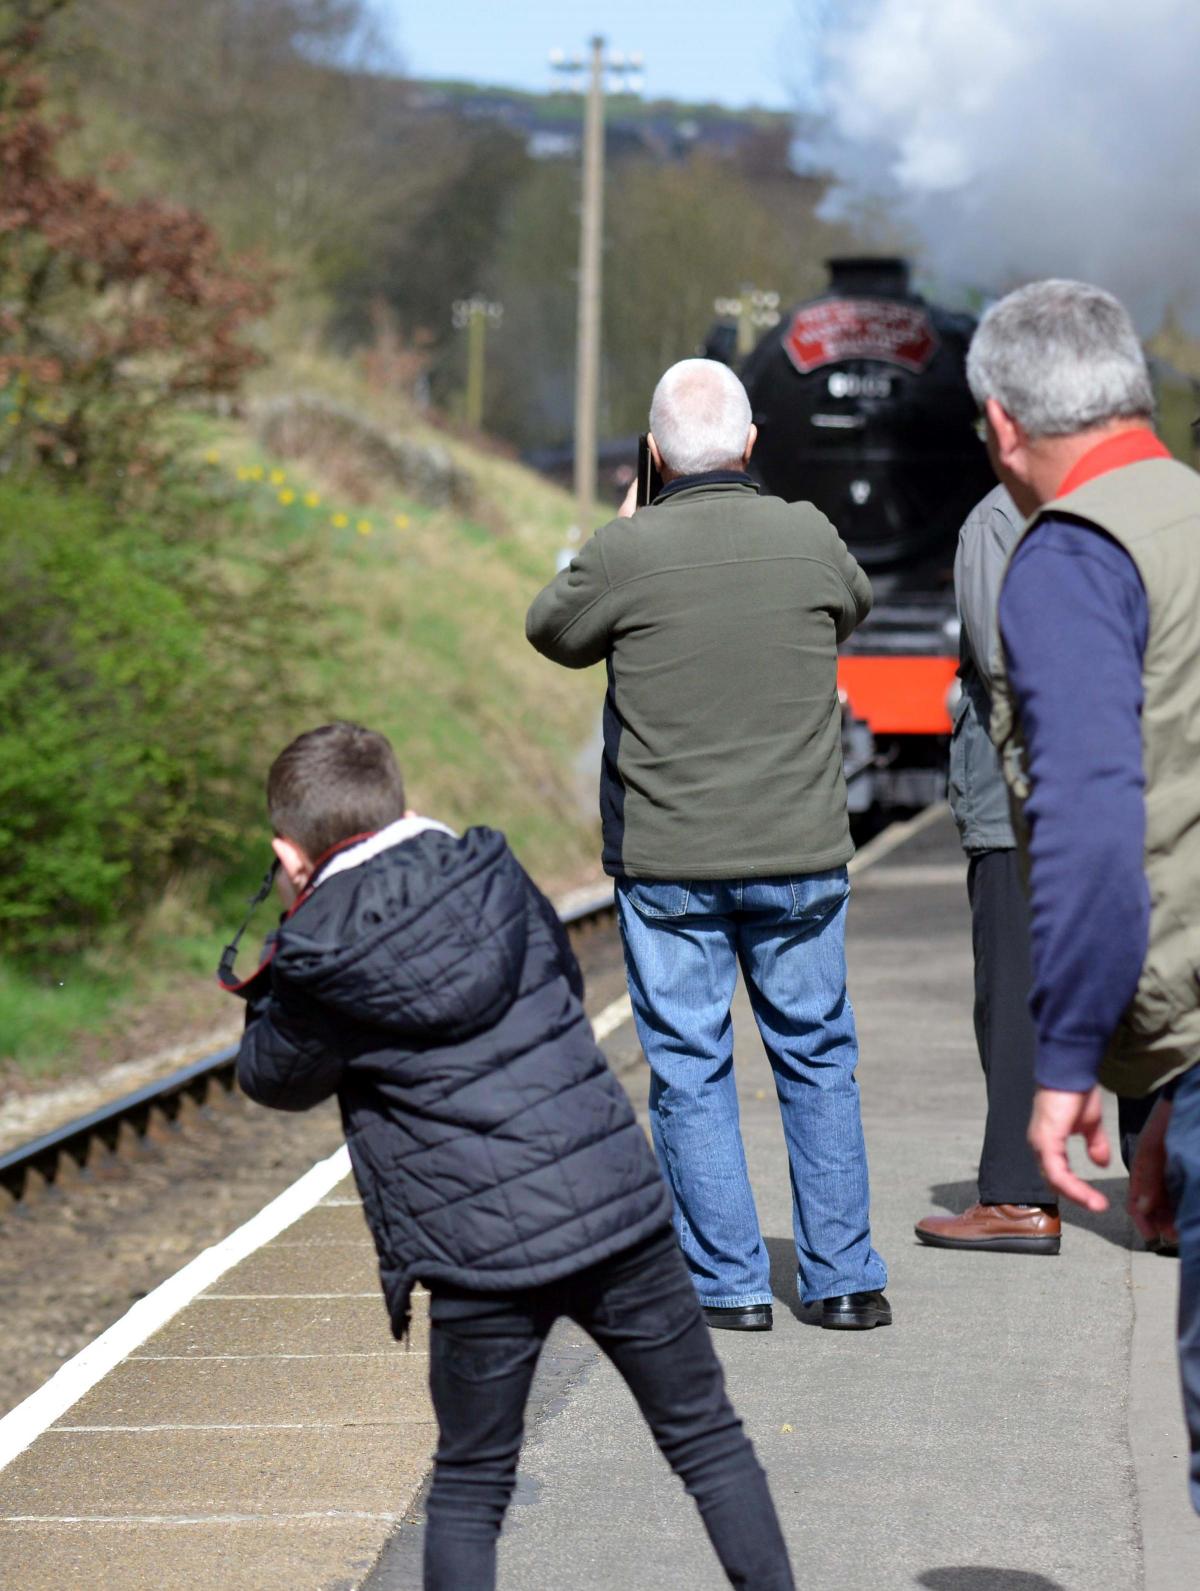 APRIL People watch wait and take pictures of the Flying Scotsman locomotive on the visit to the Keighley worth Valley line